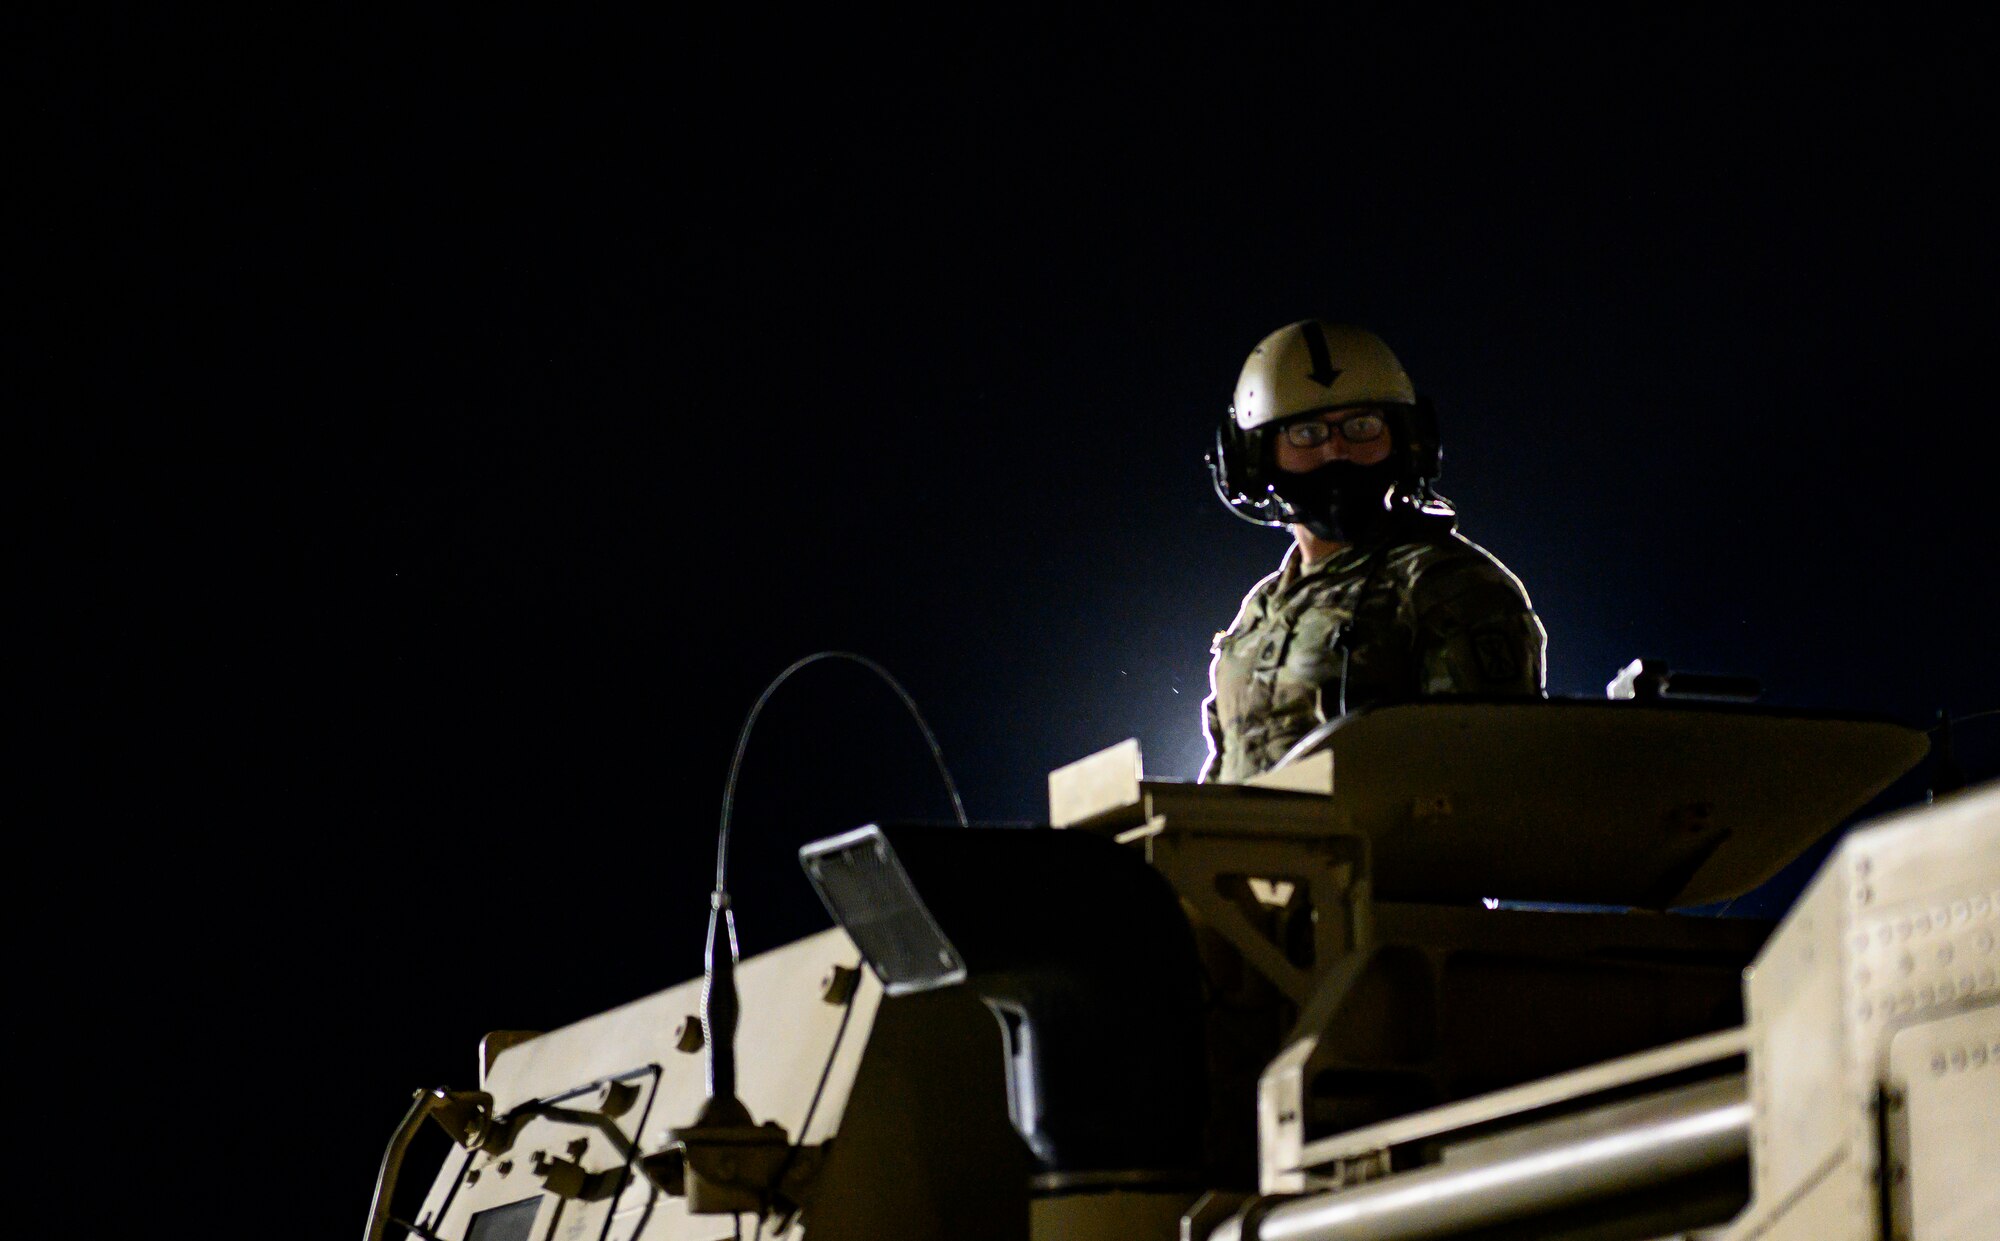 A U.S. Army Soldier waits for direction atop a High Mobility Artillery Rocket System April 27, 2021, at Mountain Home Air Force Base, Idaho. The HIMARS was used both as a simulated offensive capability as part of exercise Rainier War and as a means of training for various air mobility units who were able to familiarize the system’s configuration within cargo aircraft such as the C-17 Globemaster III. (U.S. Air Force photo by Staff Sgt. Christian Conrad)